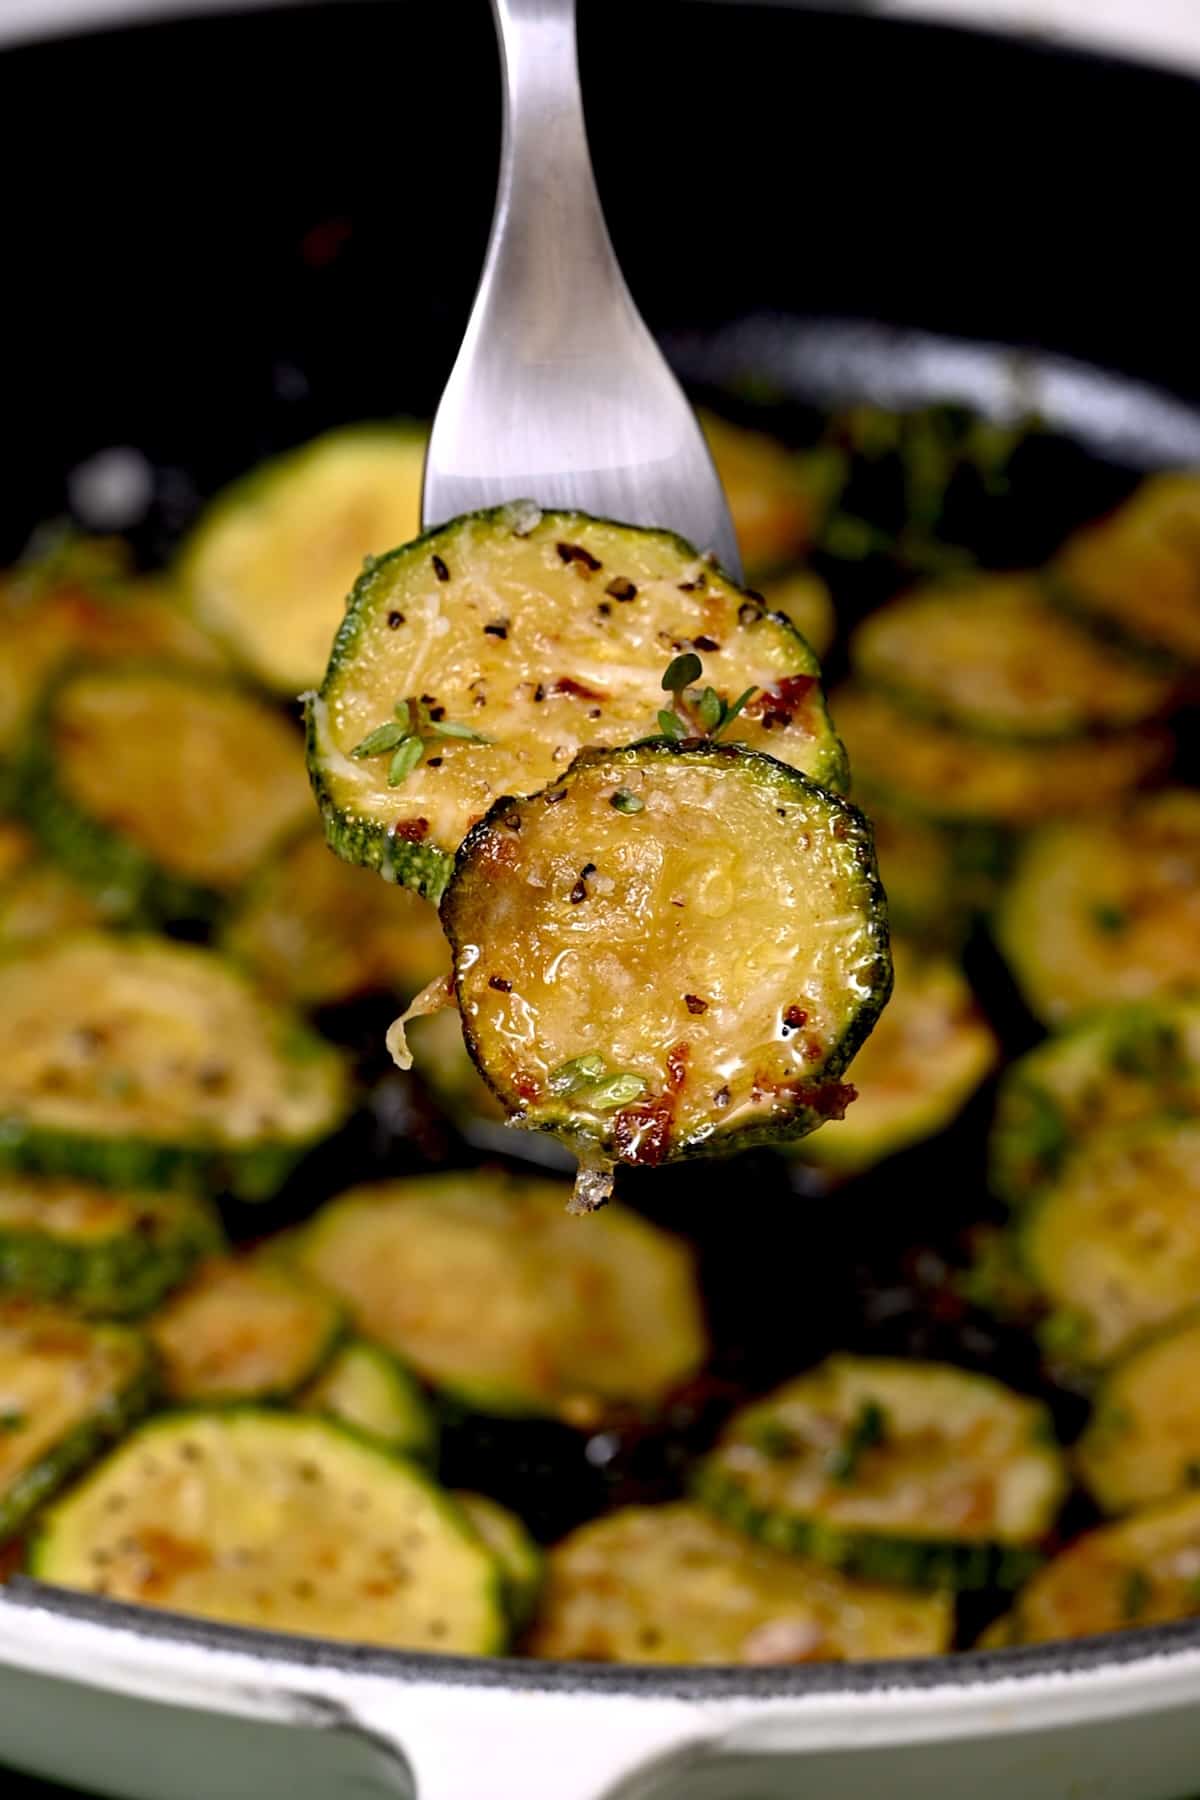 Two slices of fried zucchini